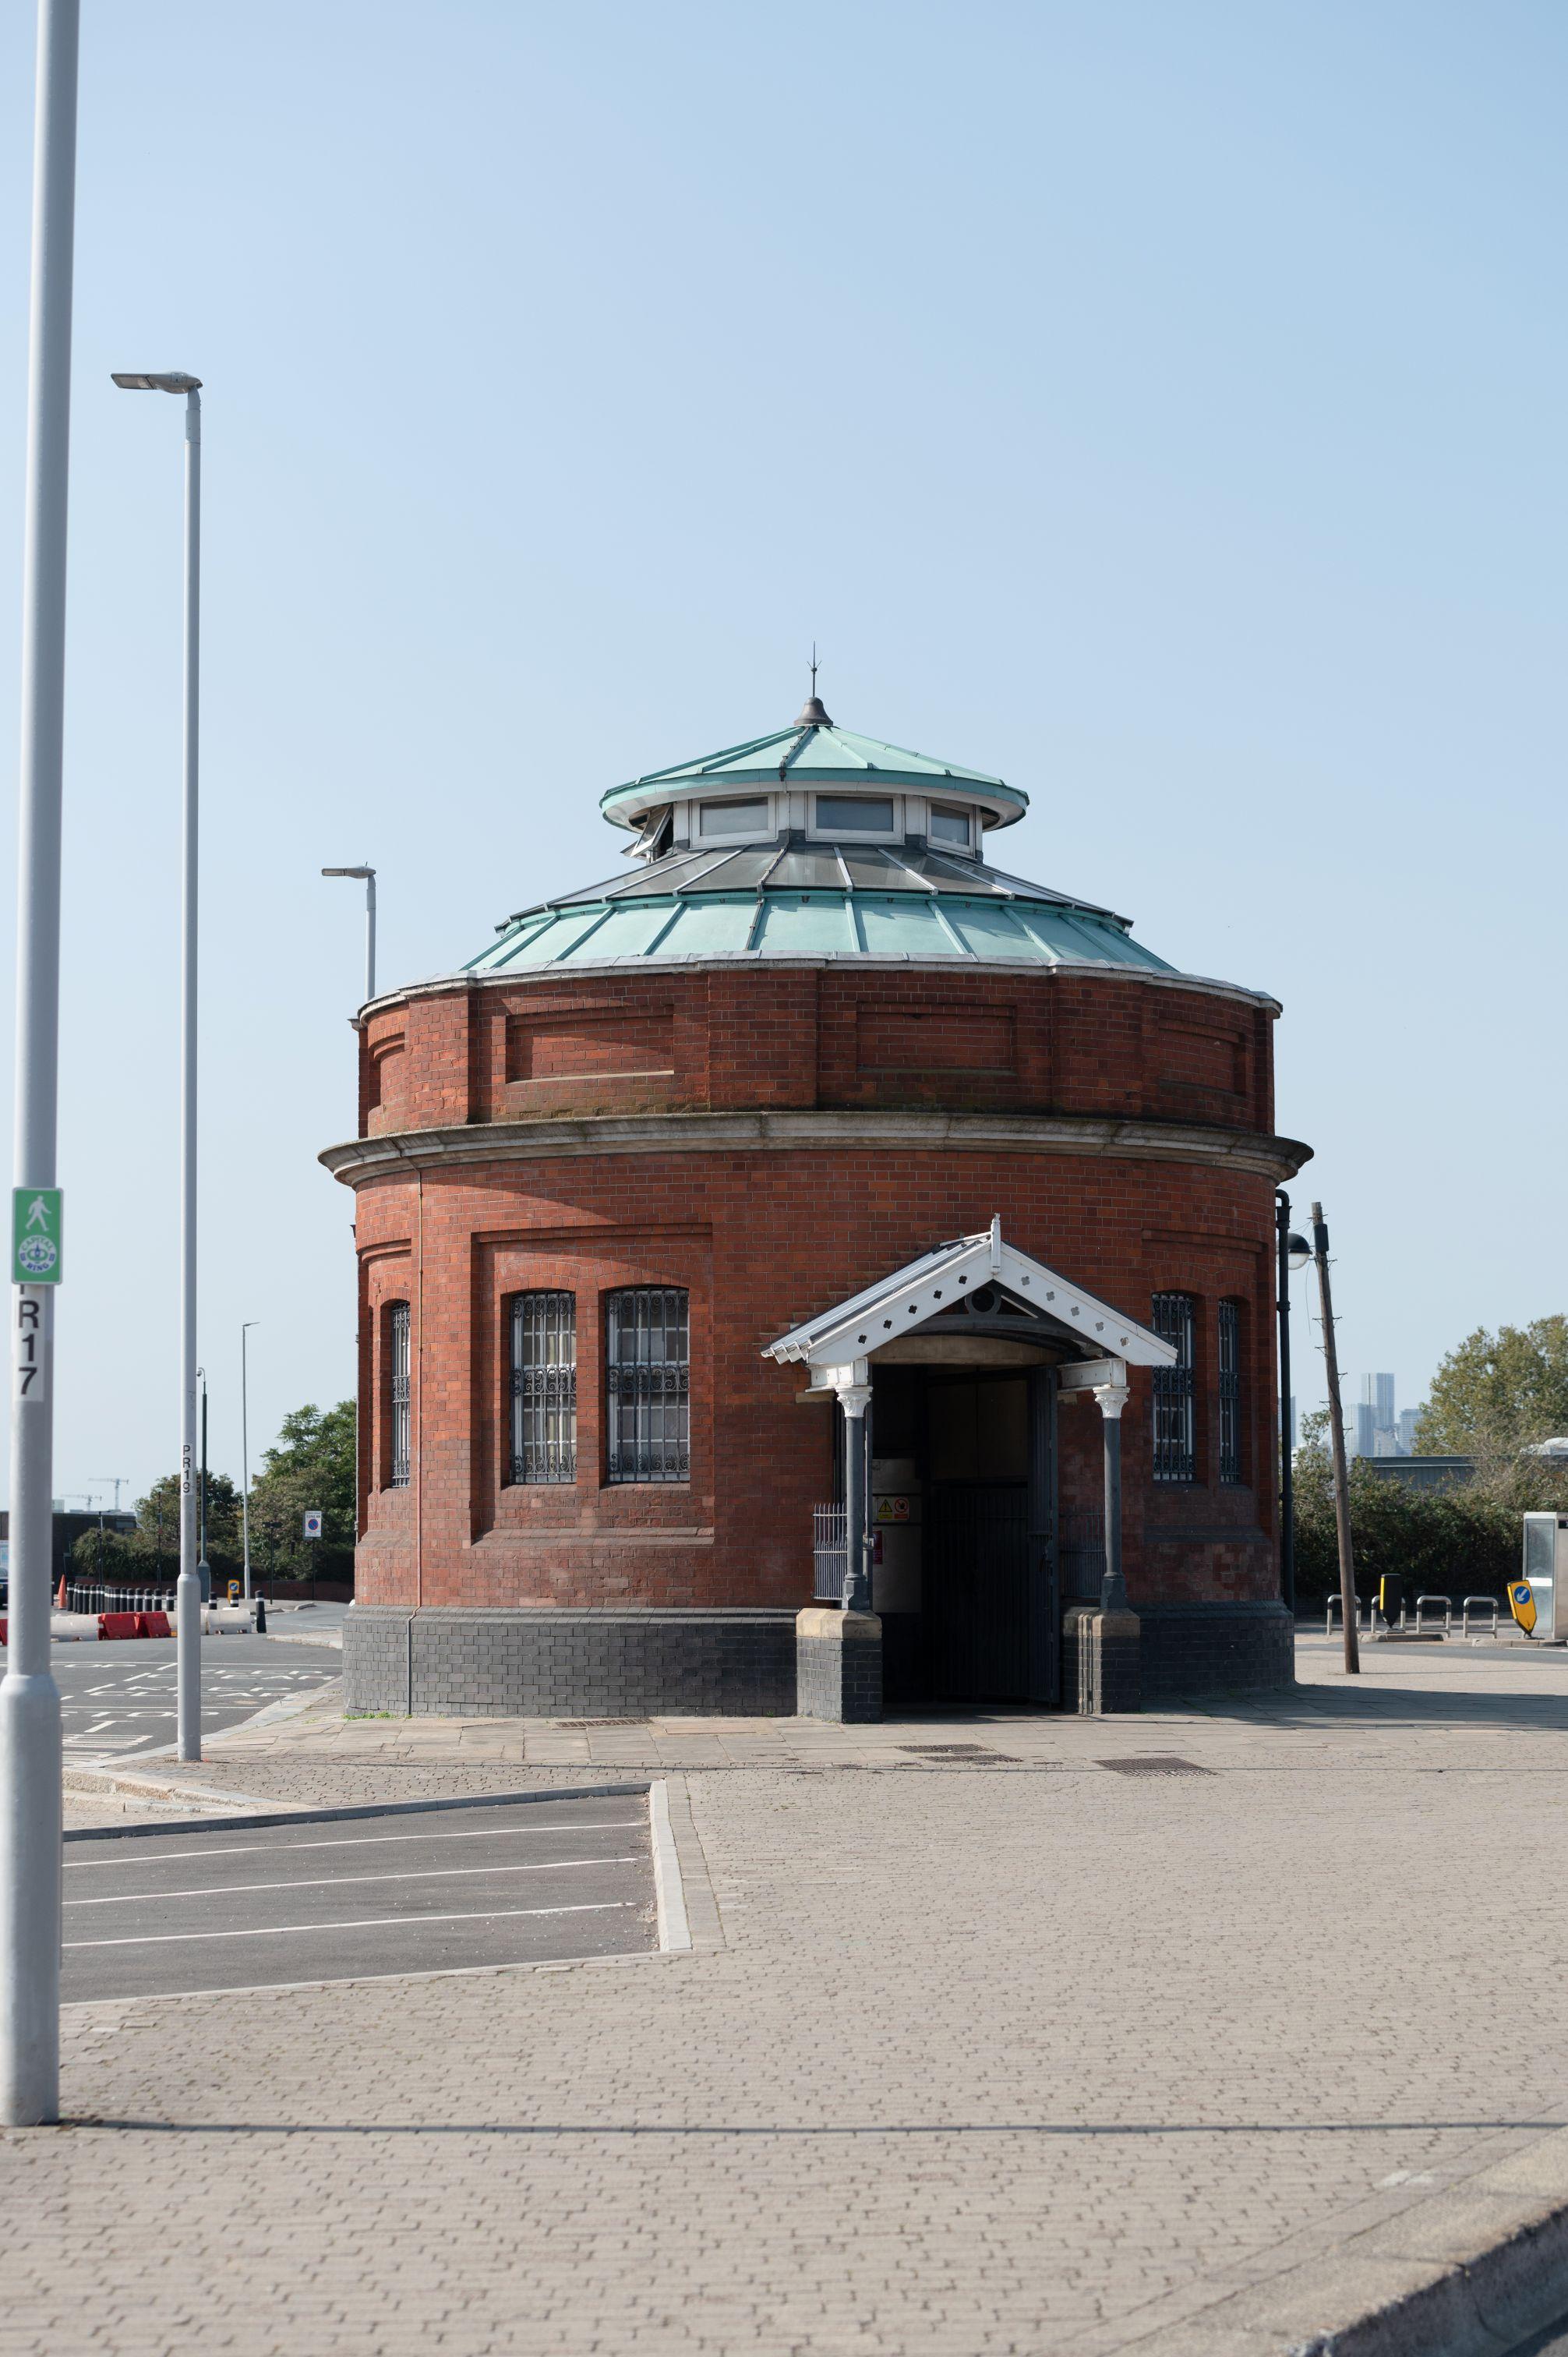 Redbrick round structure that is the entrance to the Woolwich Foot Tunnel